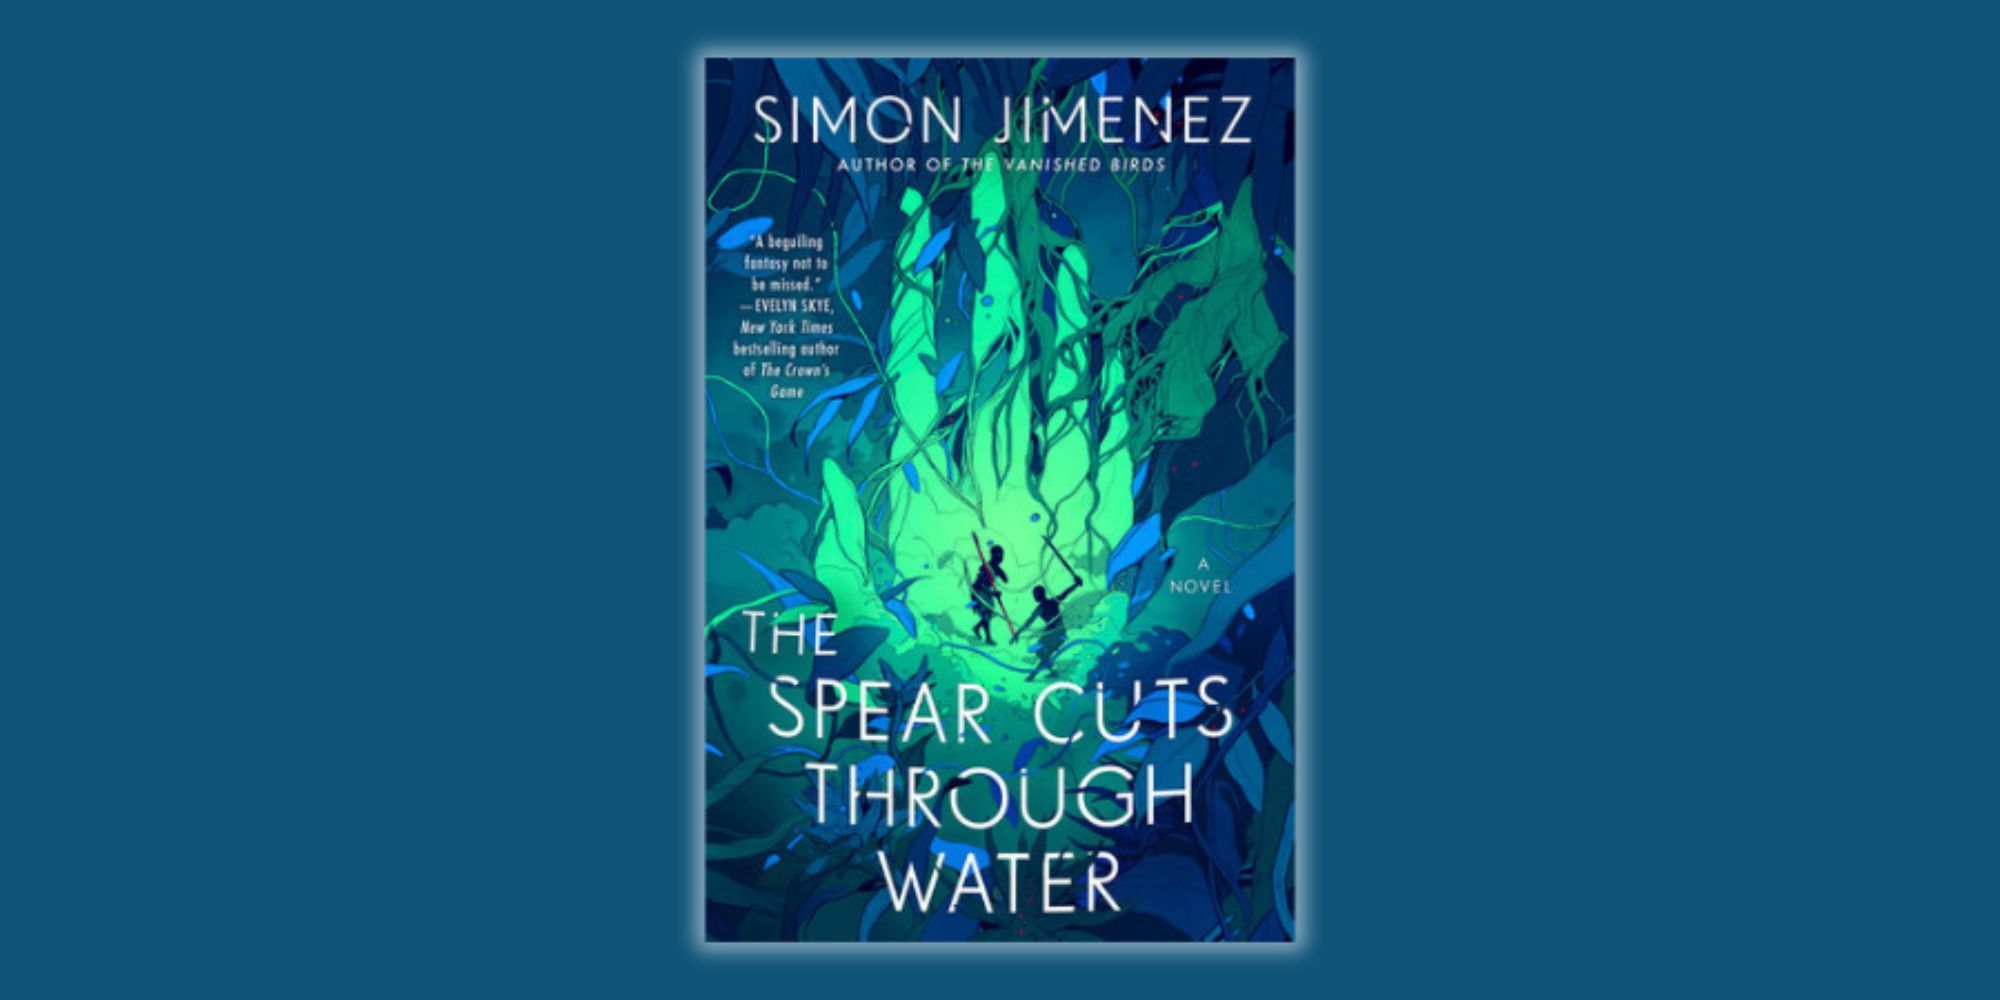 The Spear Cuts Through Water book cover